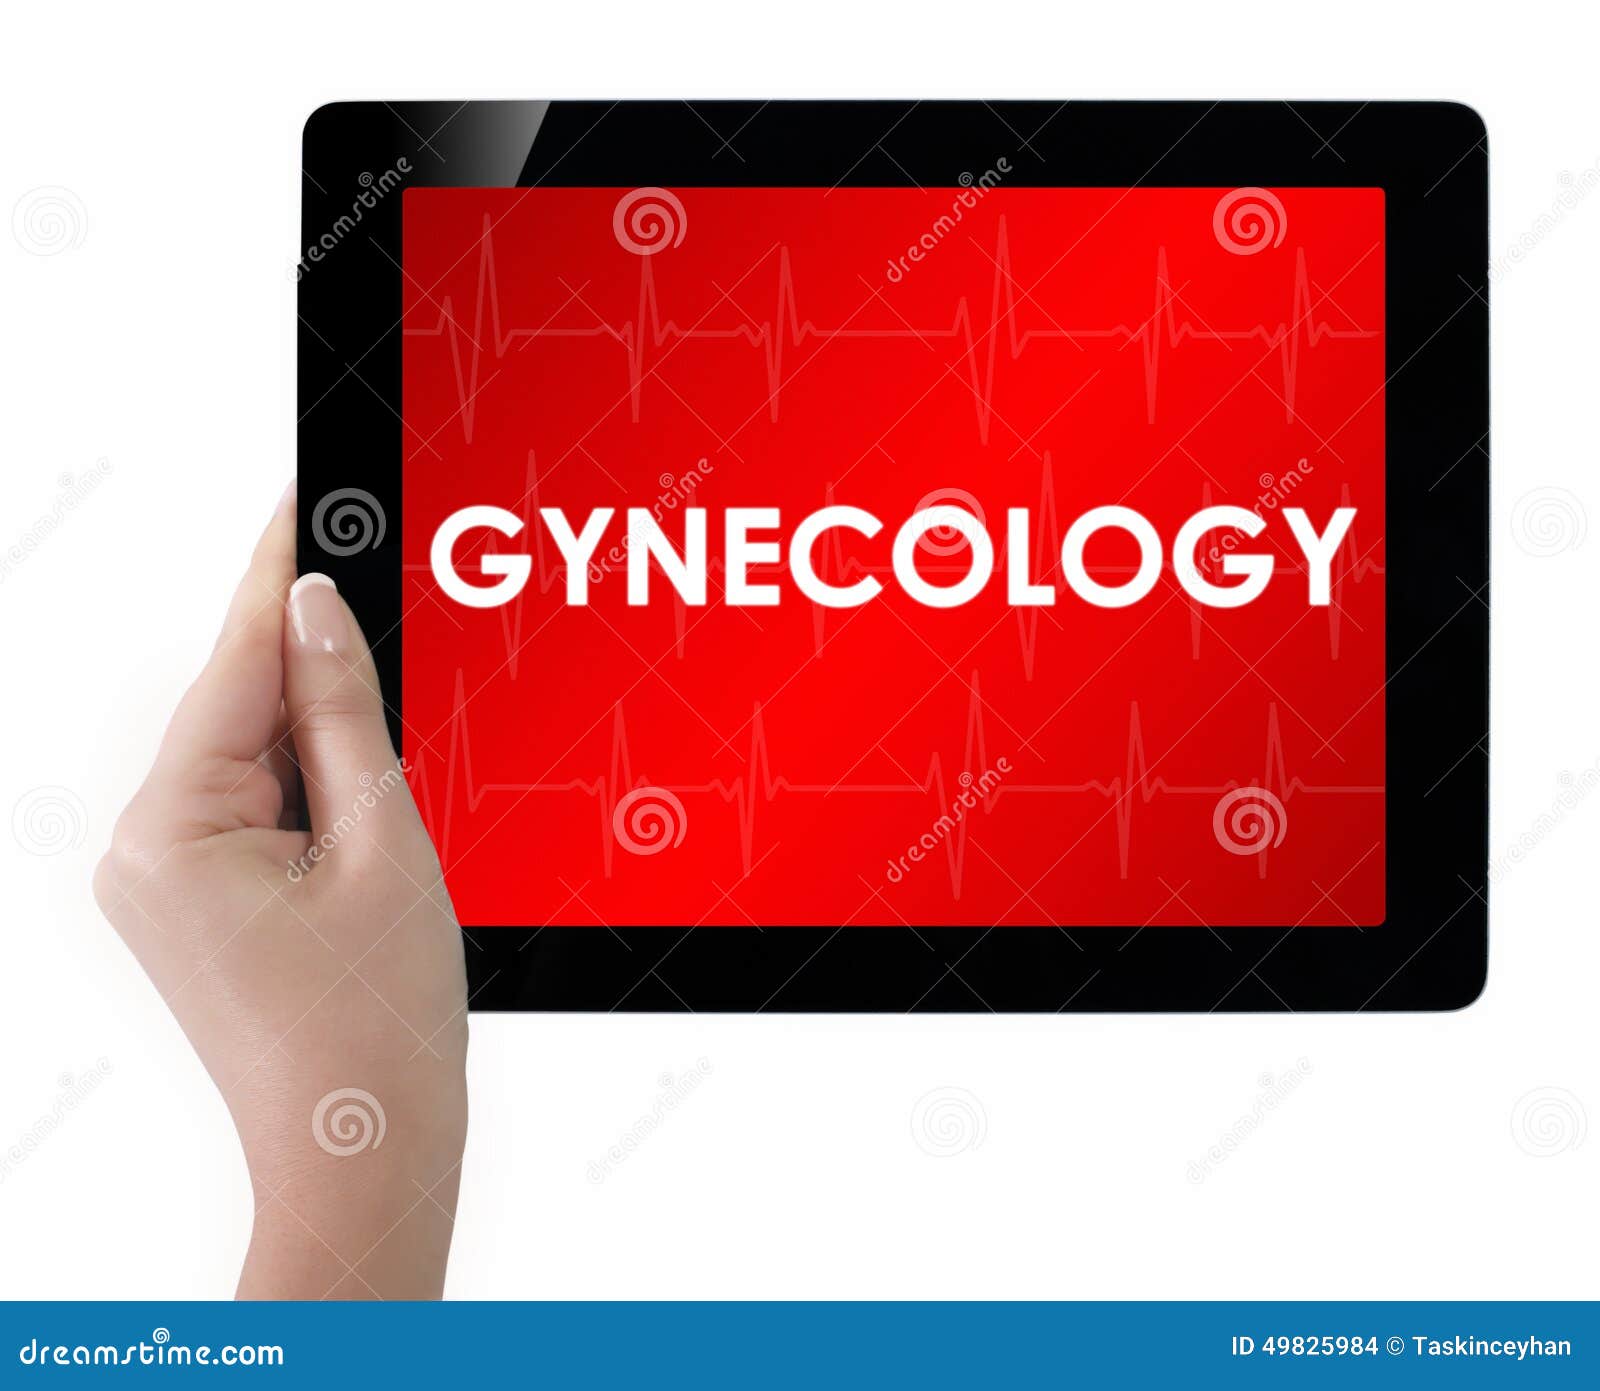 doctor showing tablet with gynecology text.